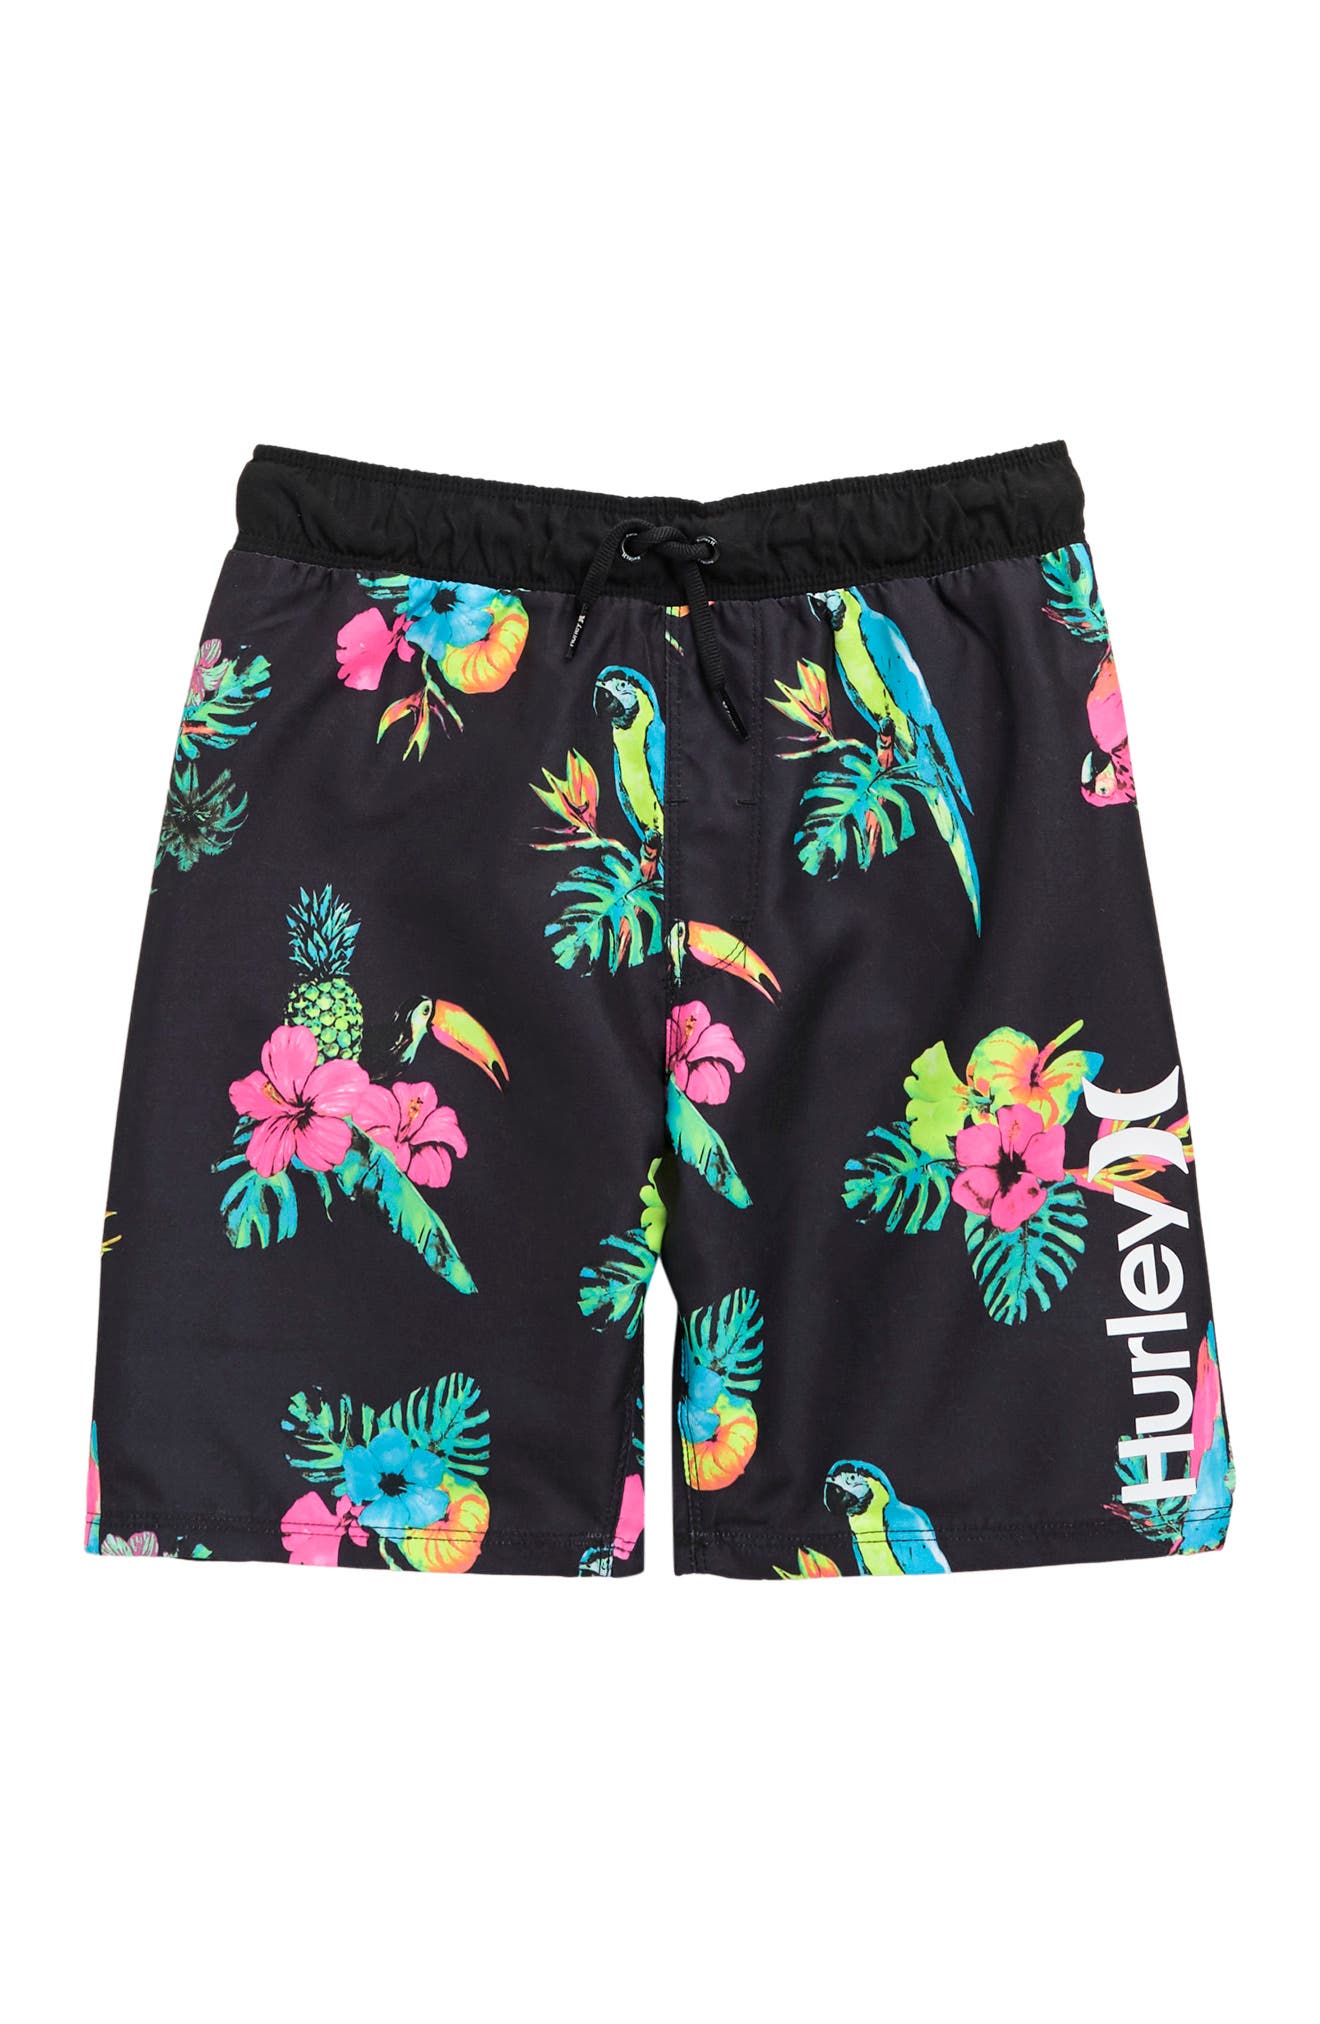 HurleyHurley Hrlb Parrot Floral Pull on SWM Short Board Fille Marque  